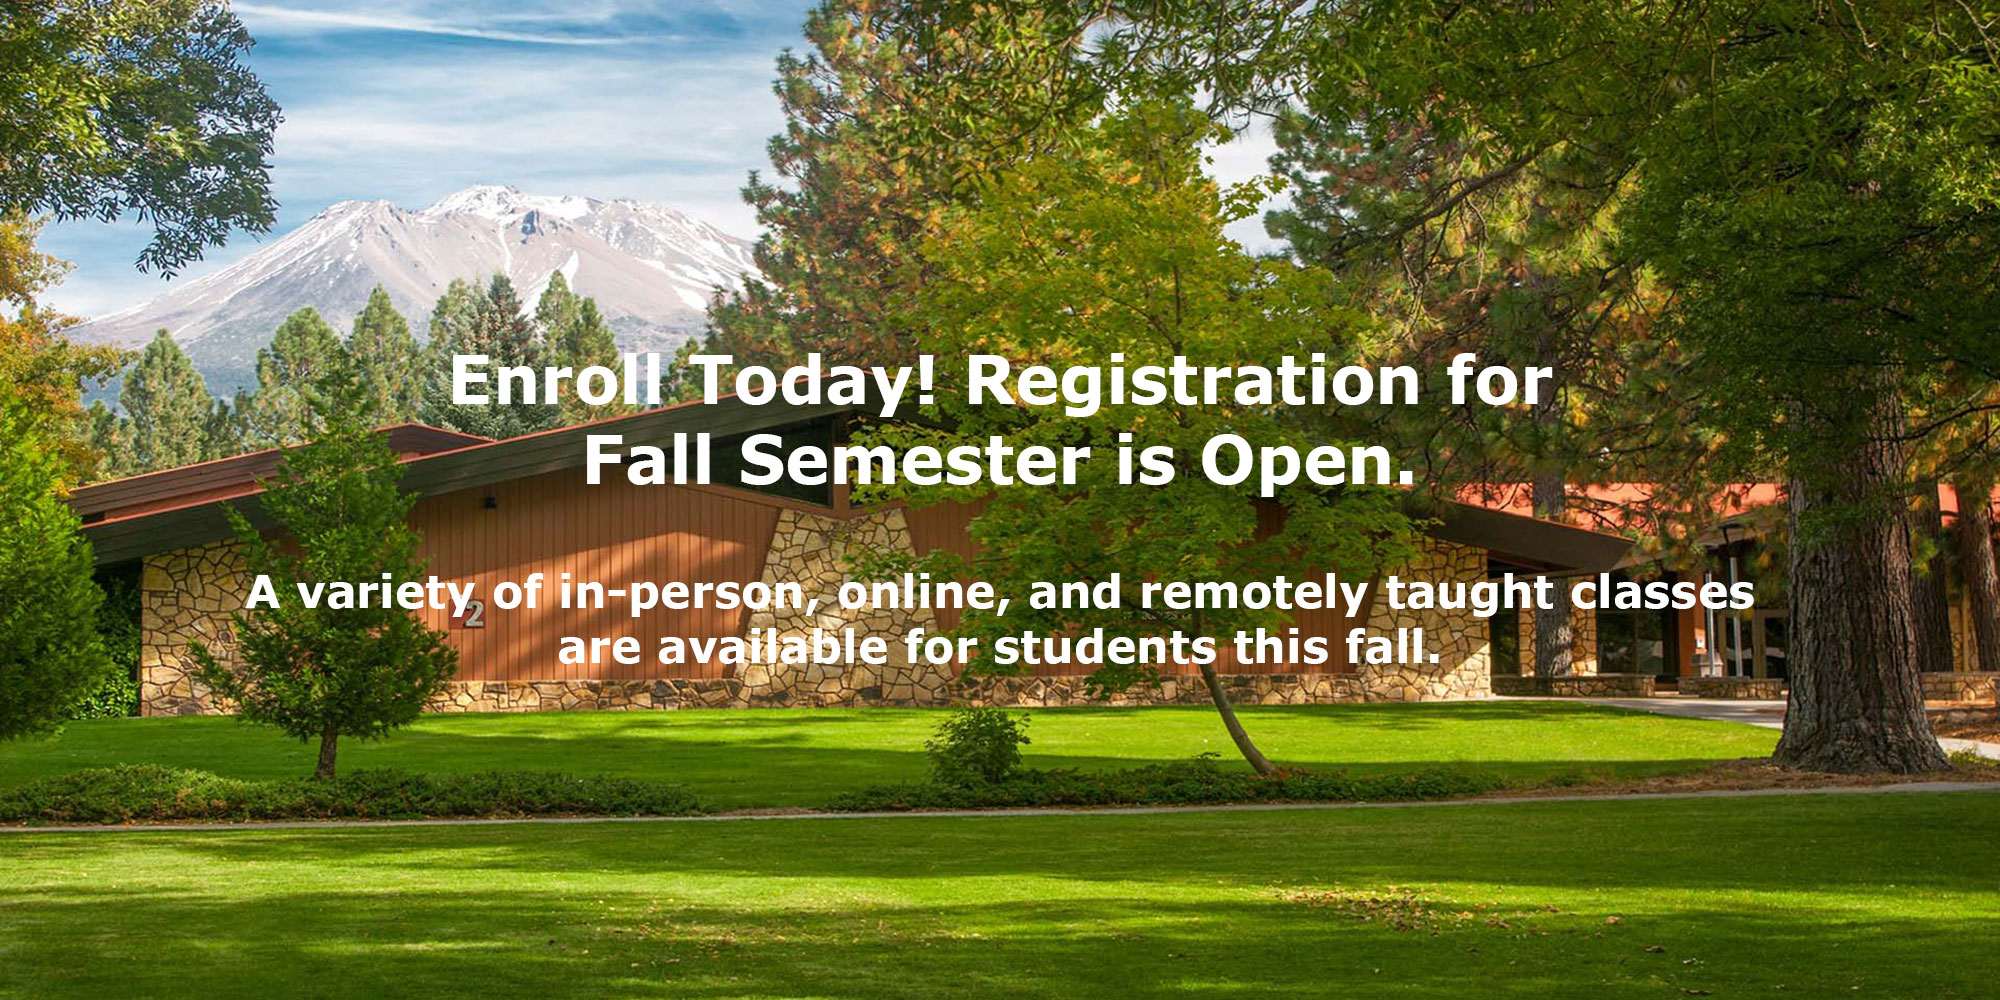 College of the Siskiyous Fall Semester Begins August 22. A variety of in-person, online, and remotely taught classes will be available for students this fall.